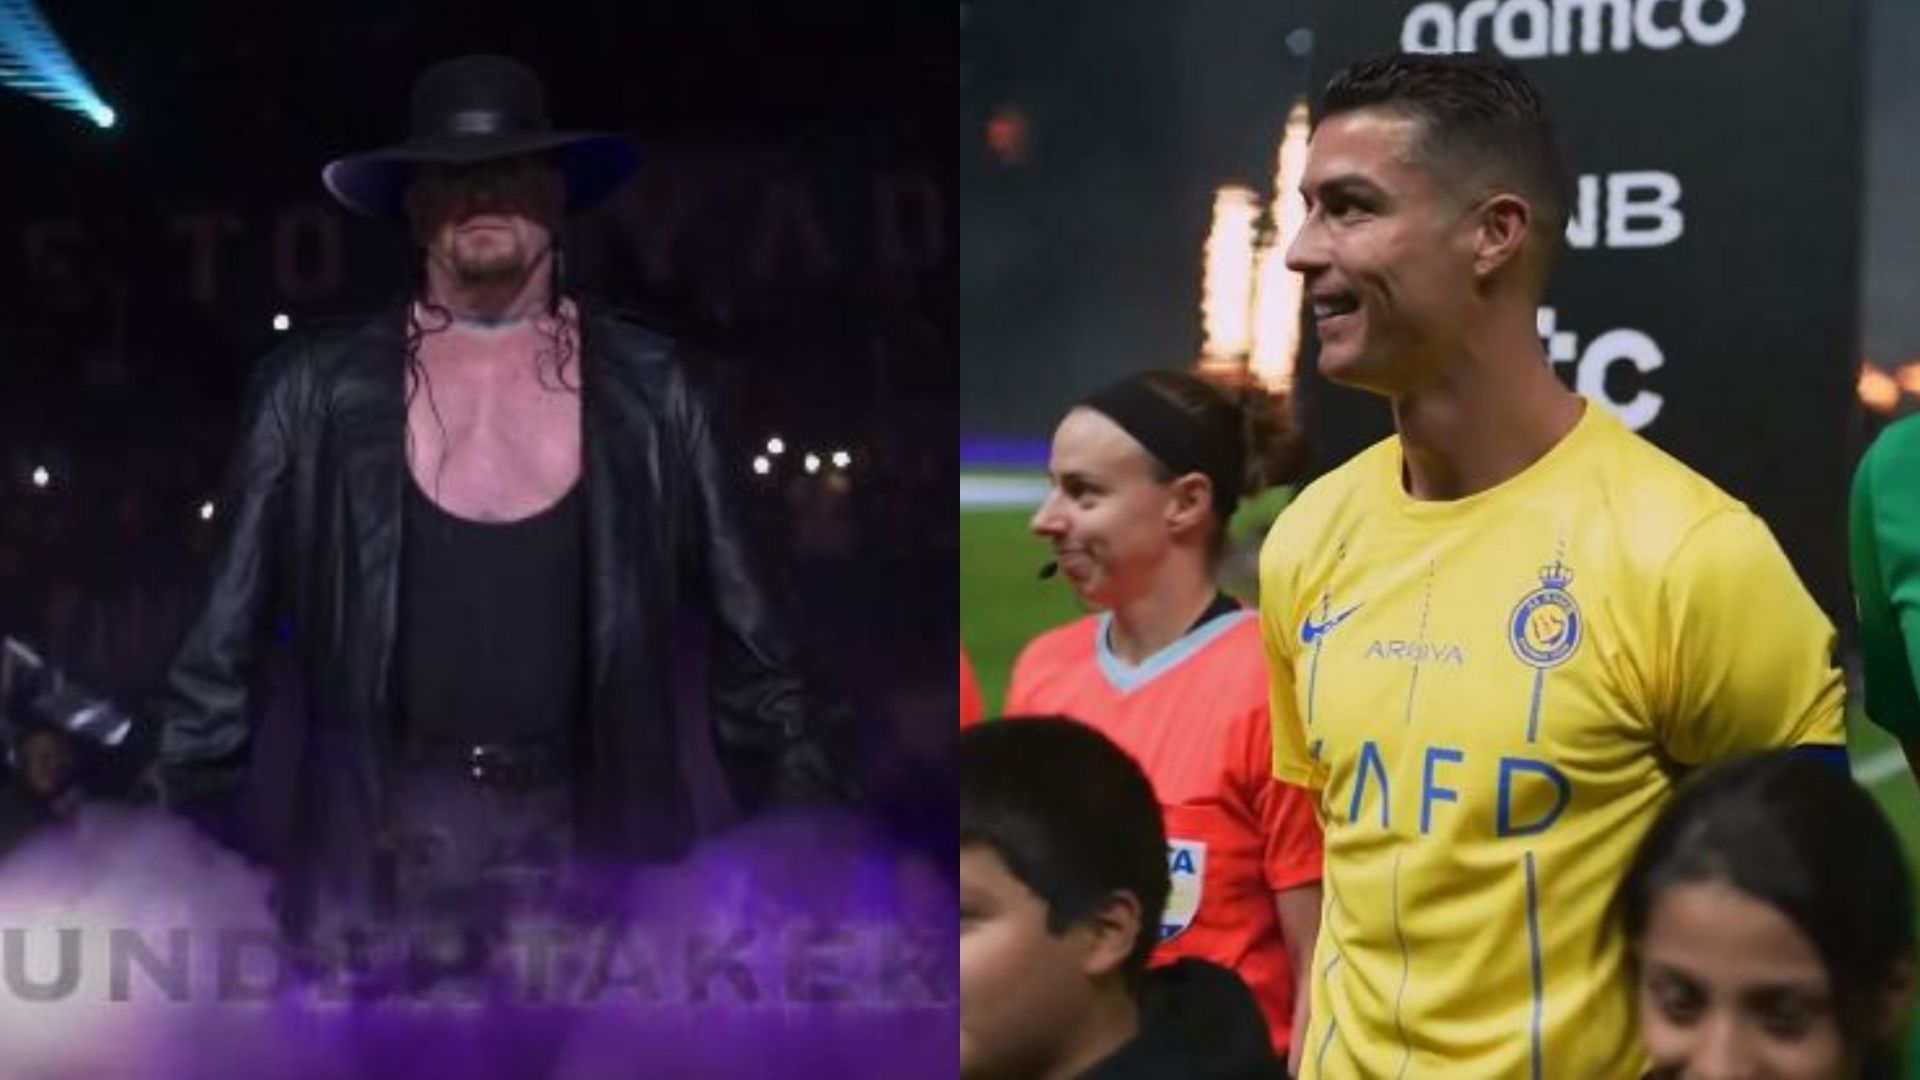 WWE Hall of Famer The Undertaker (left) and Cristiano Ronaldo (right)